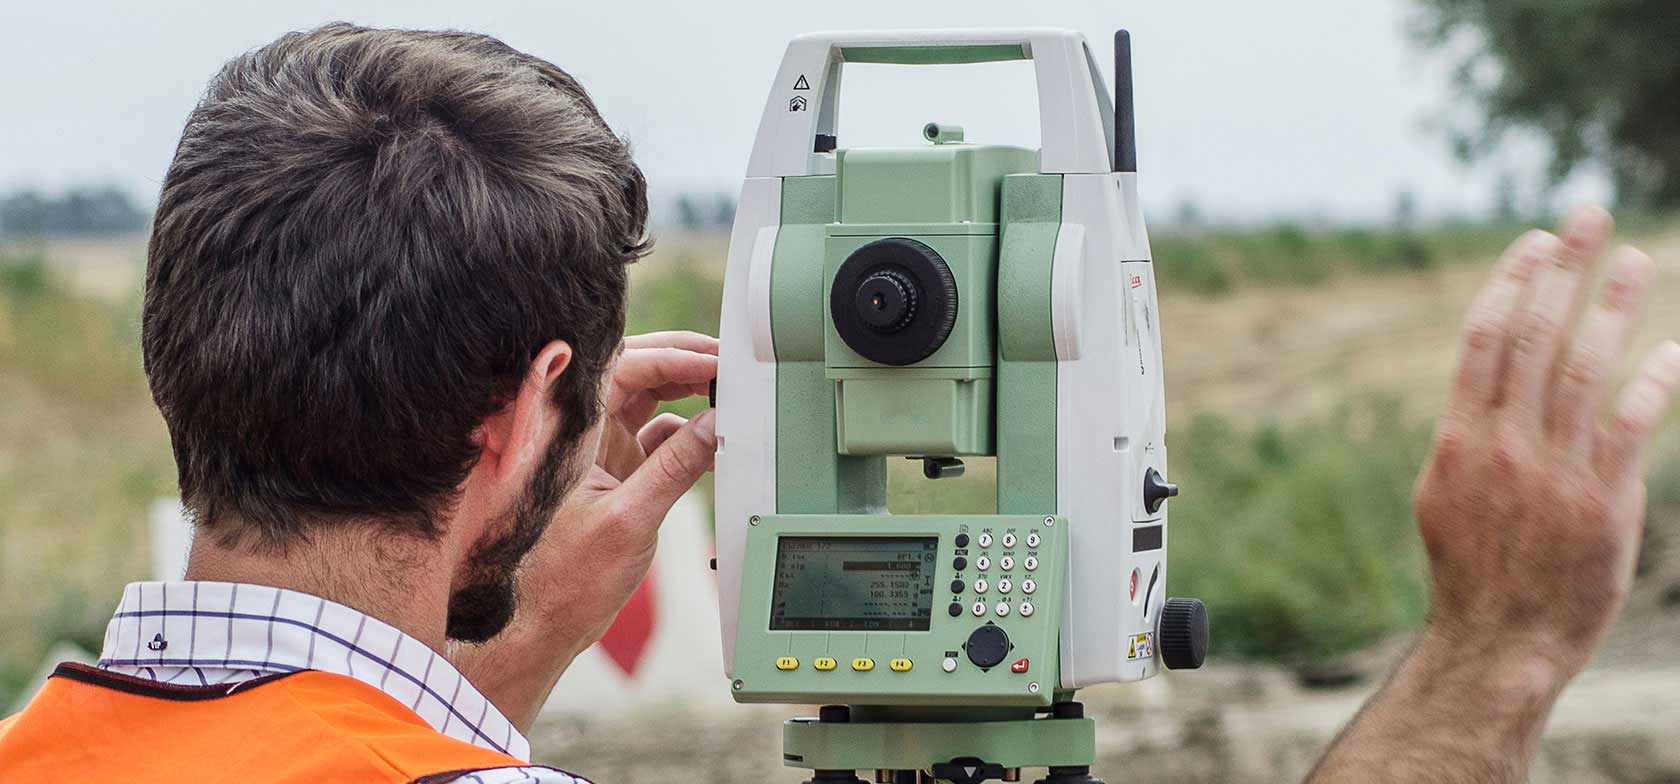 A land surveyor uses surveying equipment in the field wearing an orange safety vest